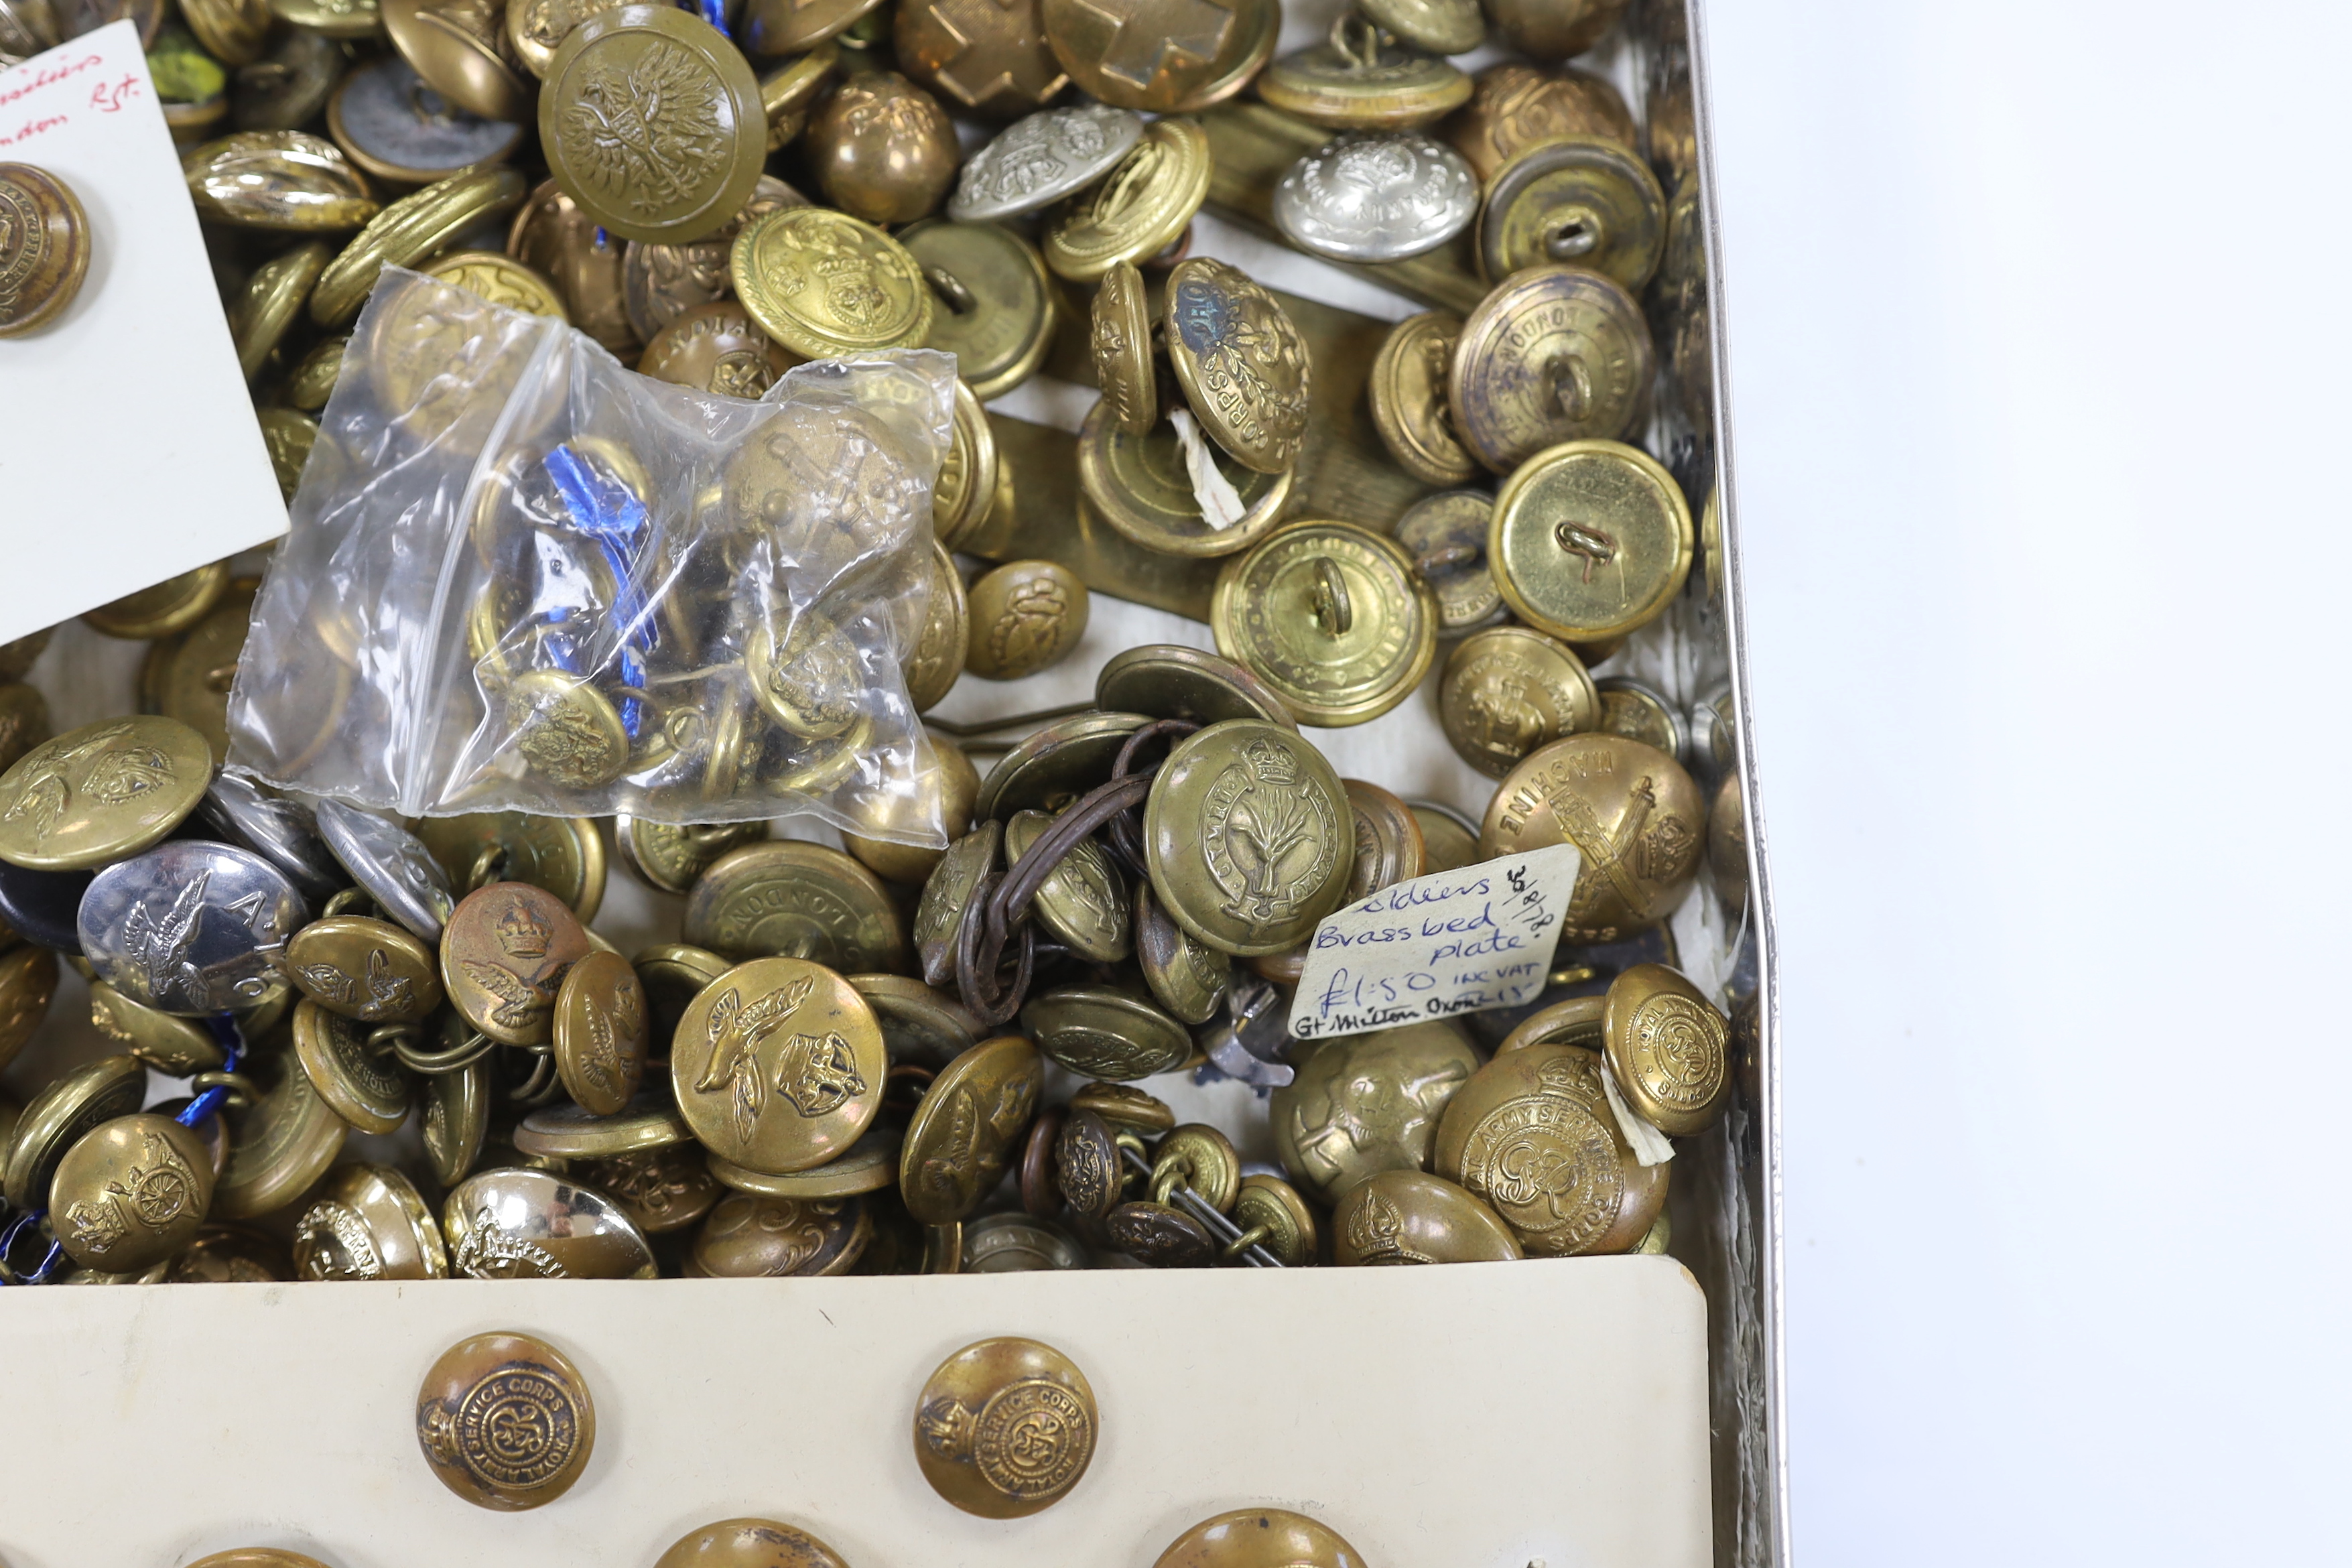 A collection of military buttons, examples including; Royal Fusiliers, Royal Navy, Royal Artillery, RASC, RAMC, RAF, etc. and a few cloth titles, etc.